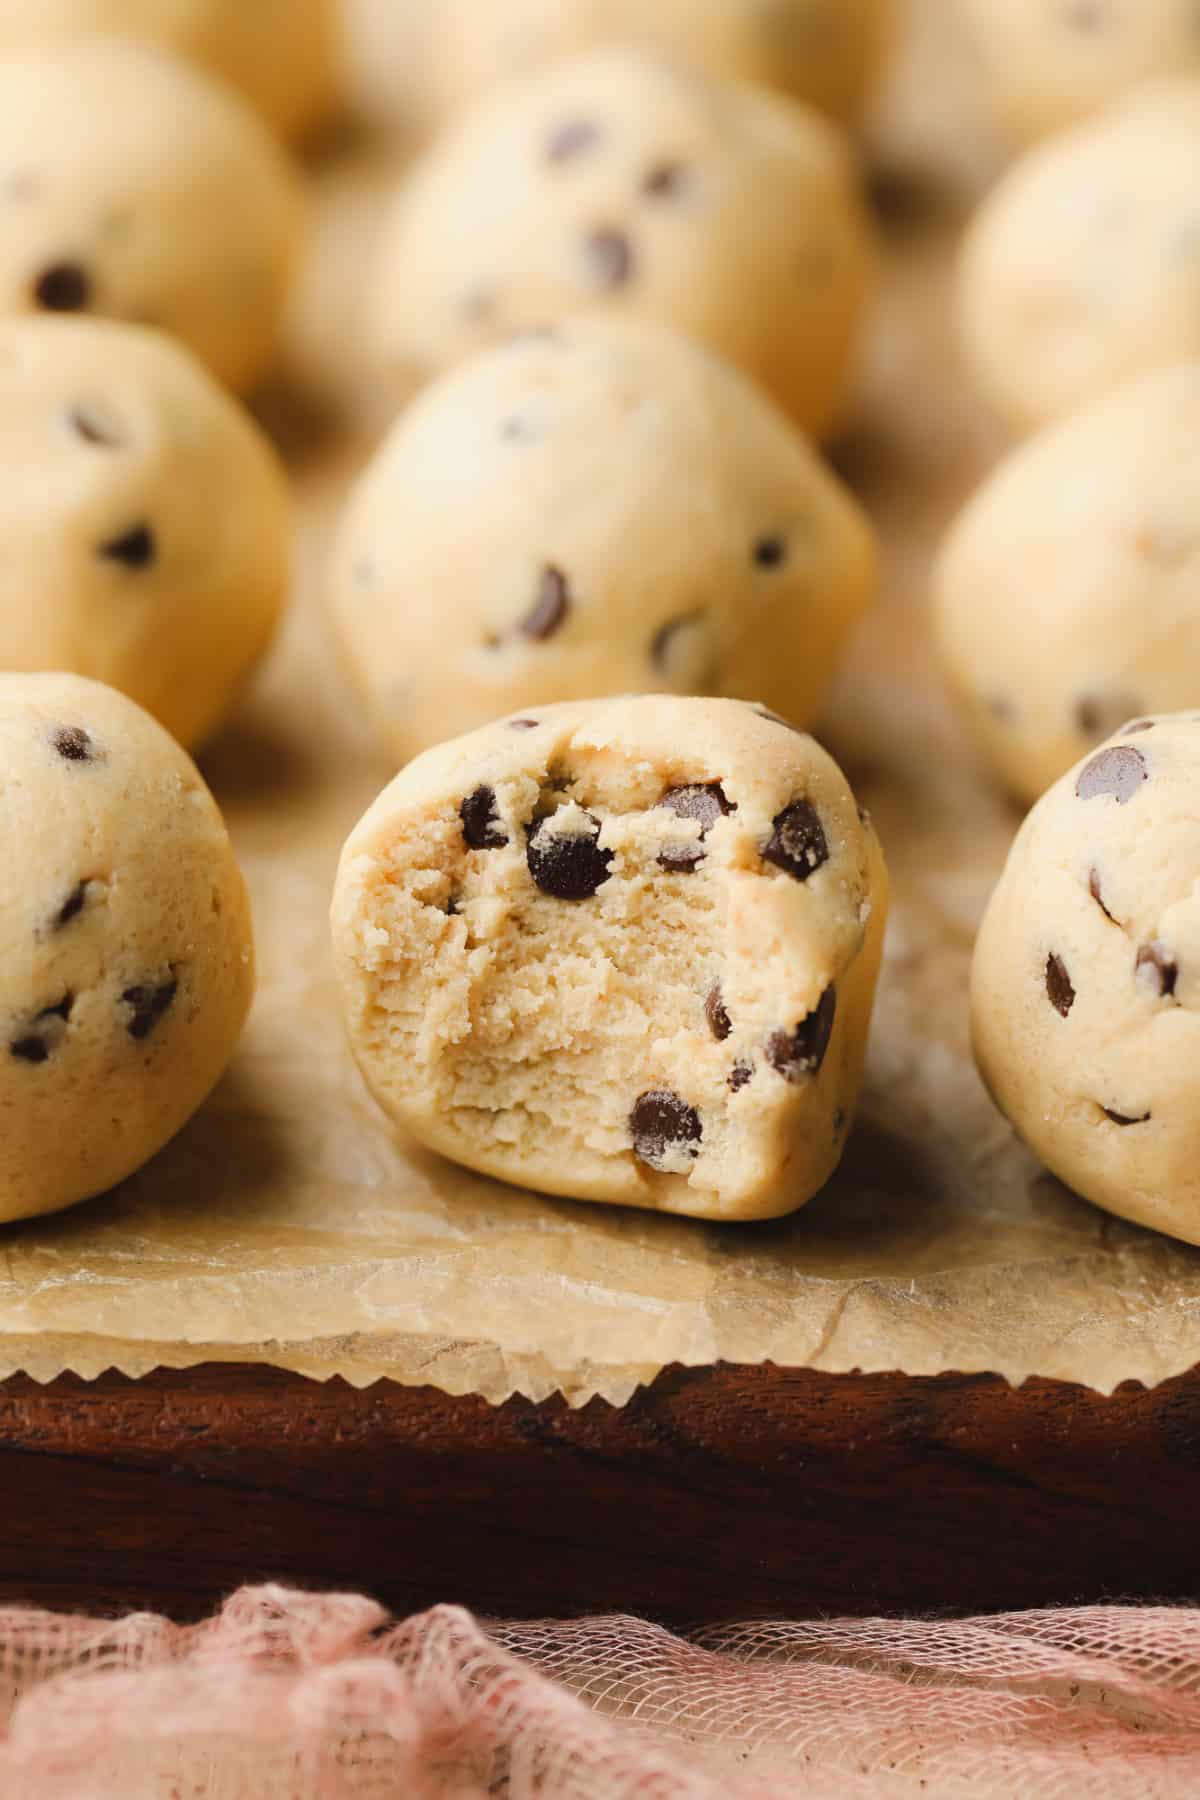 many balls of vegan cookie dough with one having had a bite taken out of it showing middle